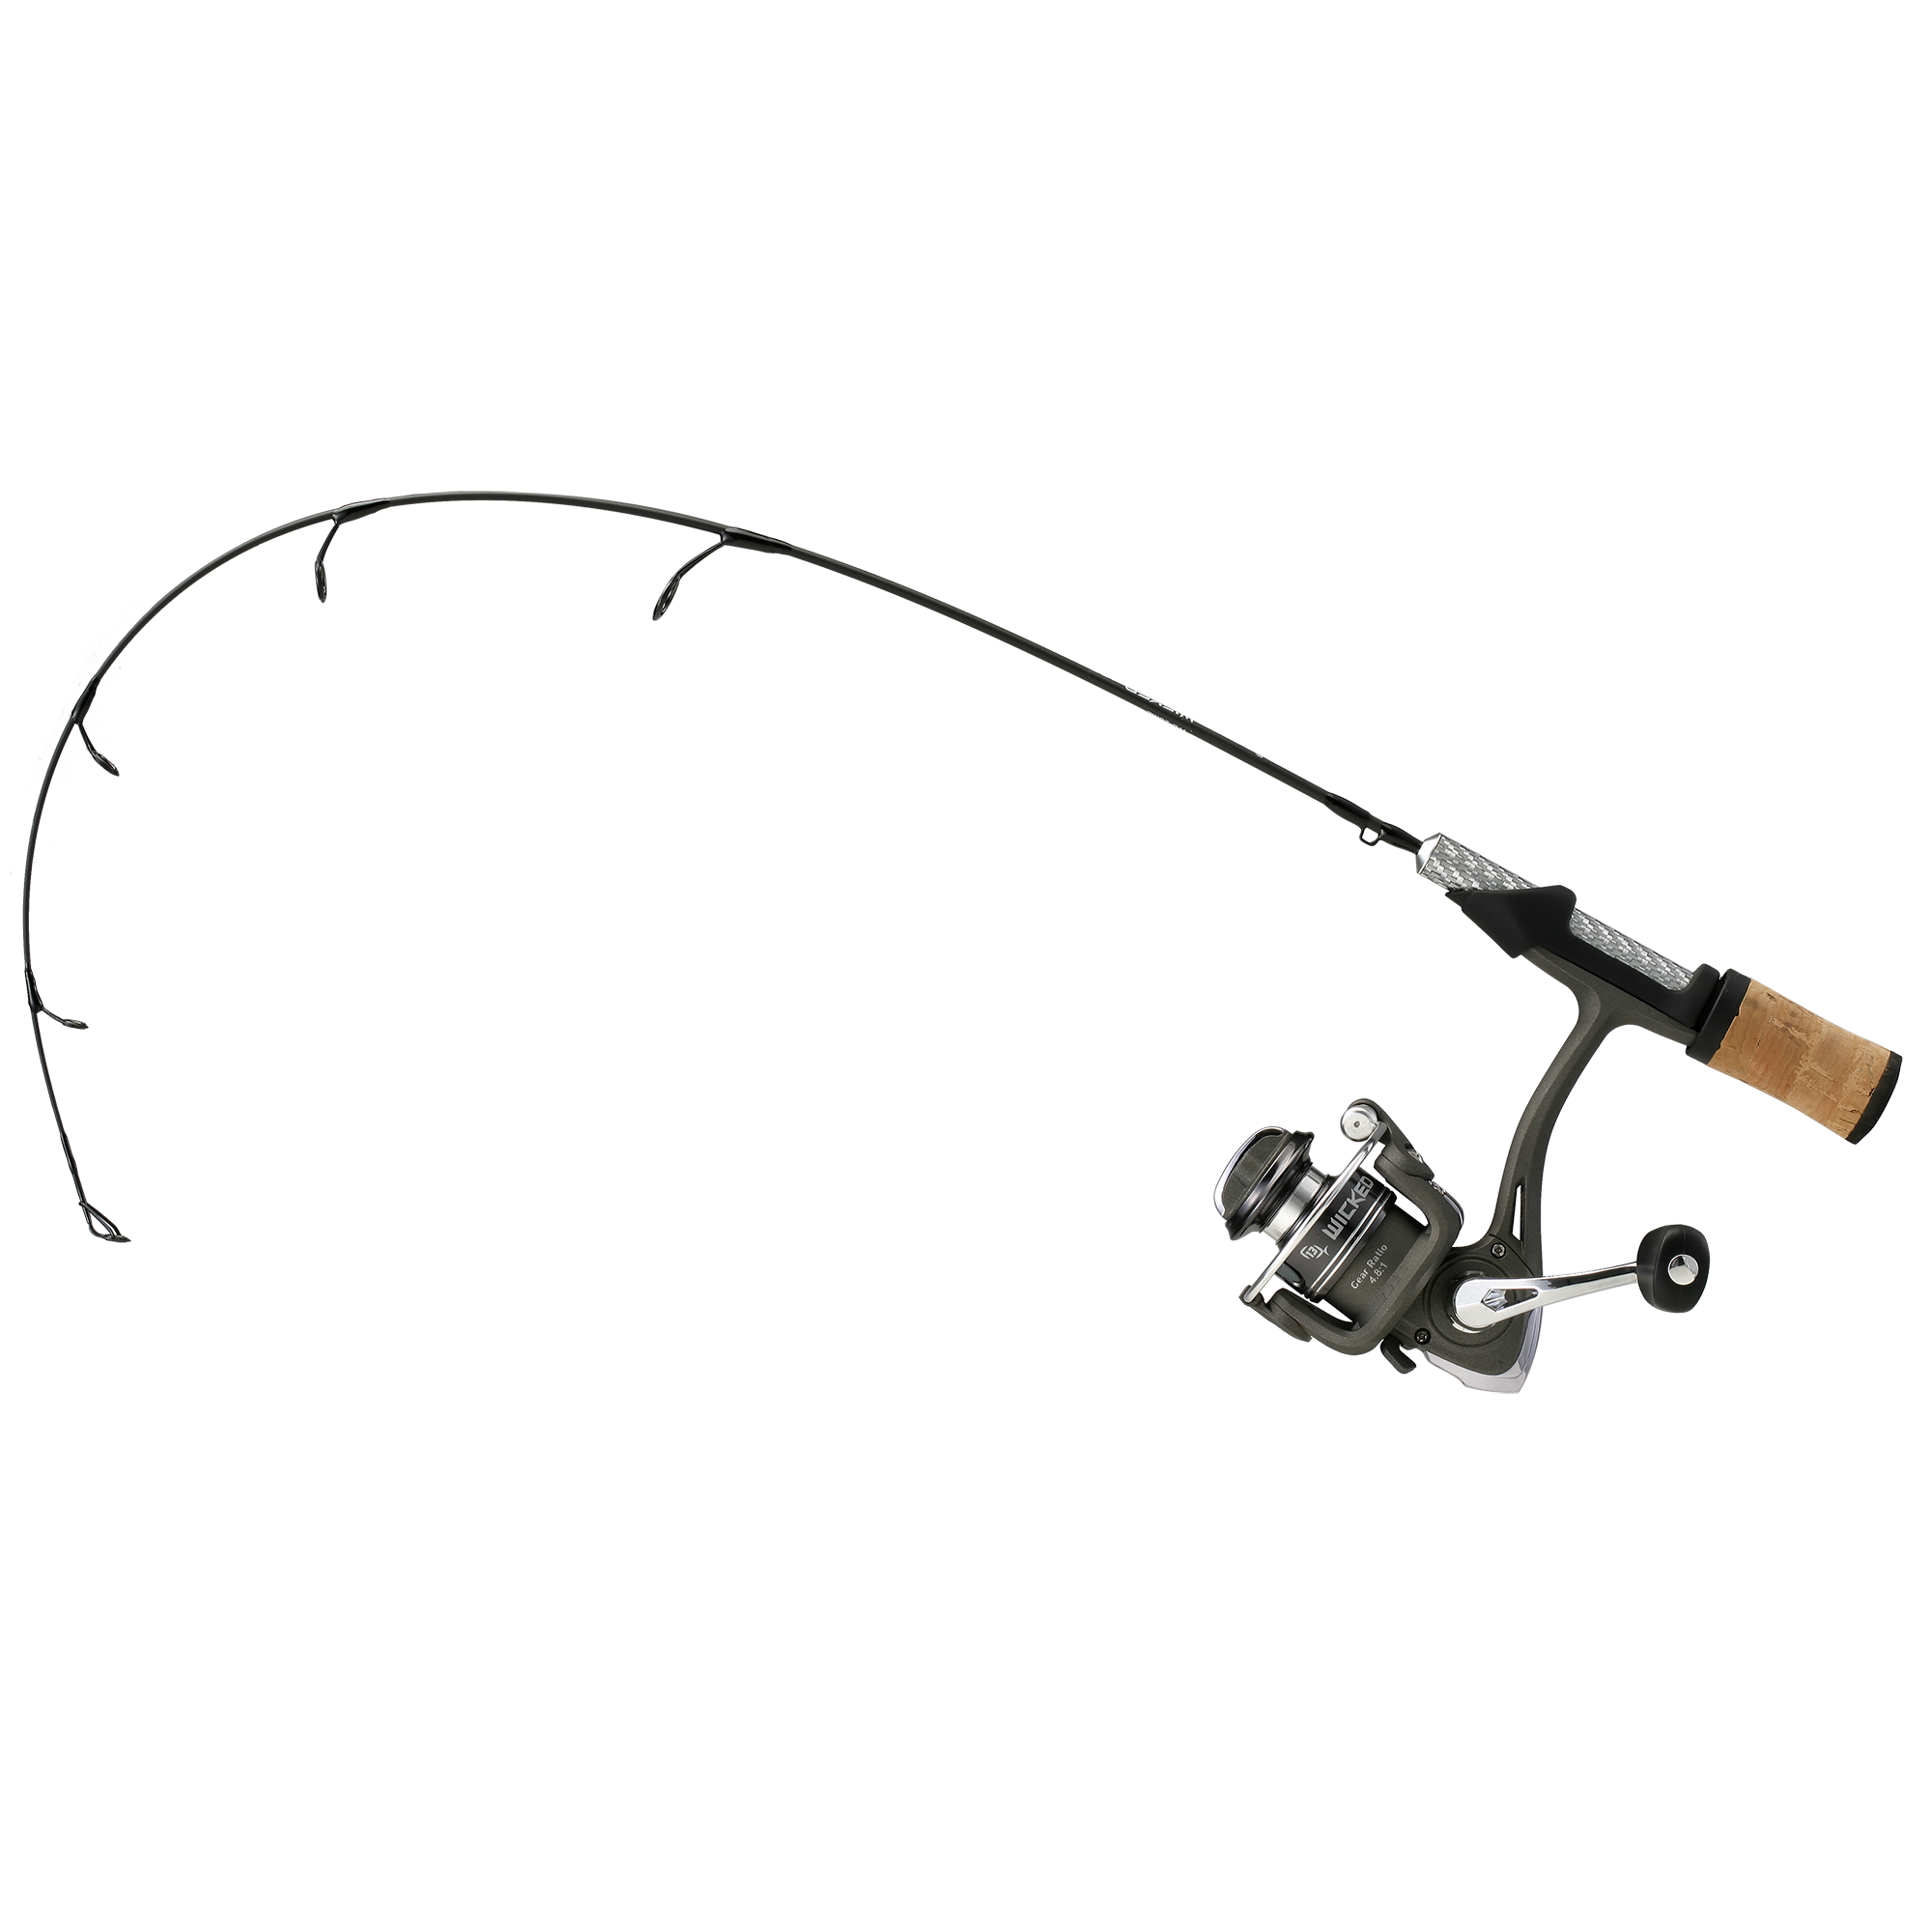 A Fishing Pole PNG Transparent Images Free Download, Vector Files